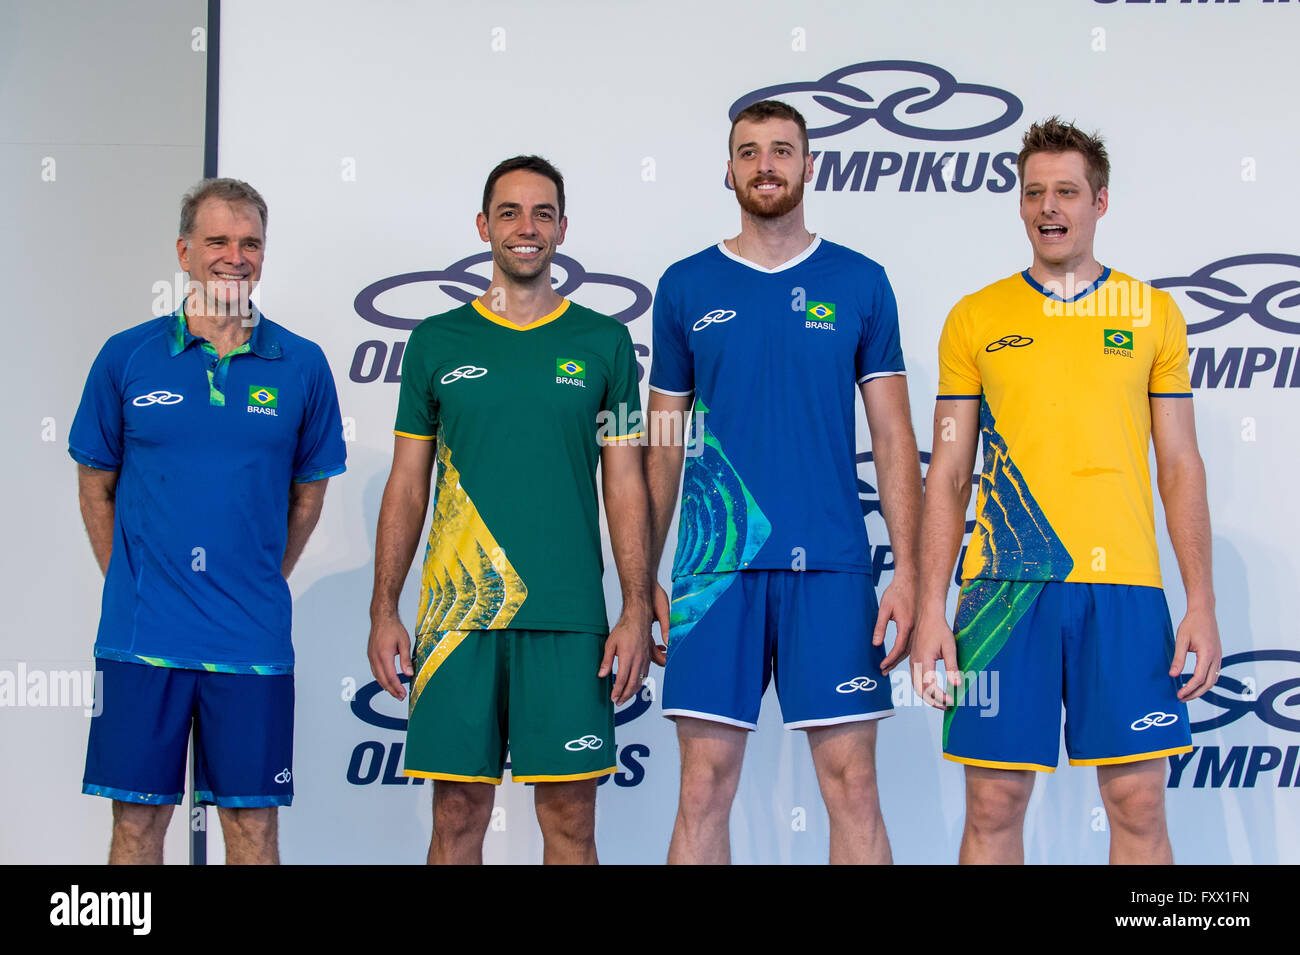 brazil volleyball jersey for sale